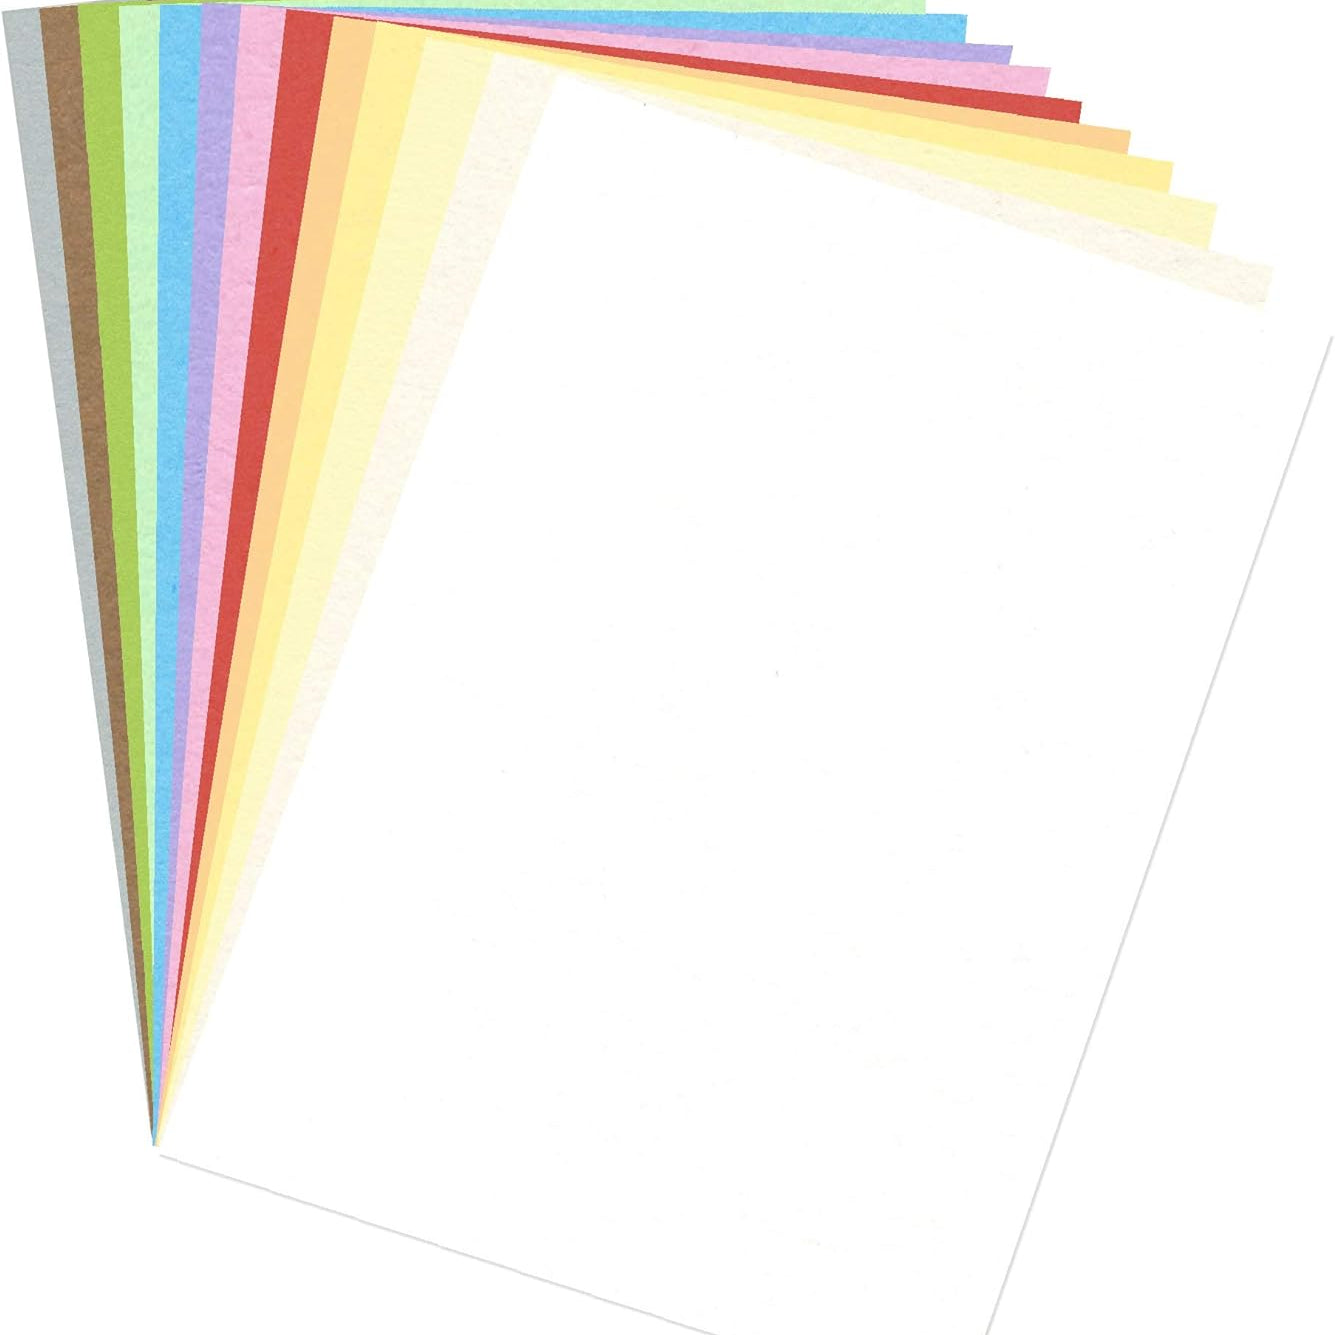 CLAIREFONTAINE Maya Pad A4 185gsm 25s Assorted Pastel